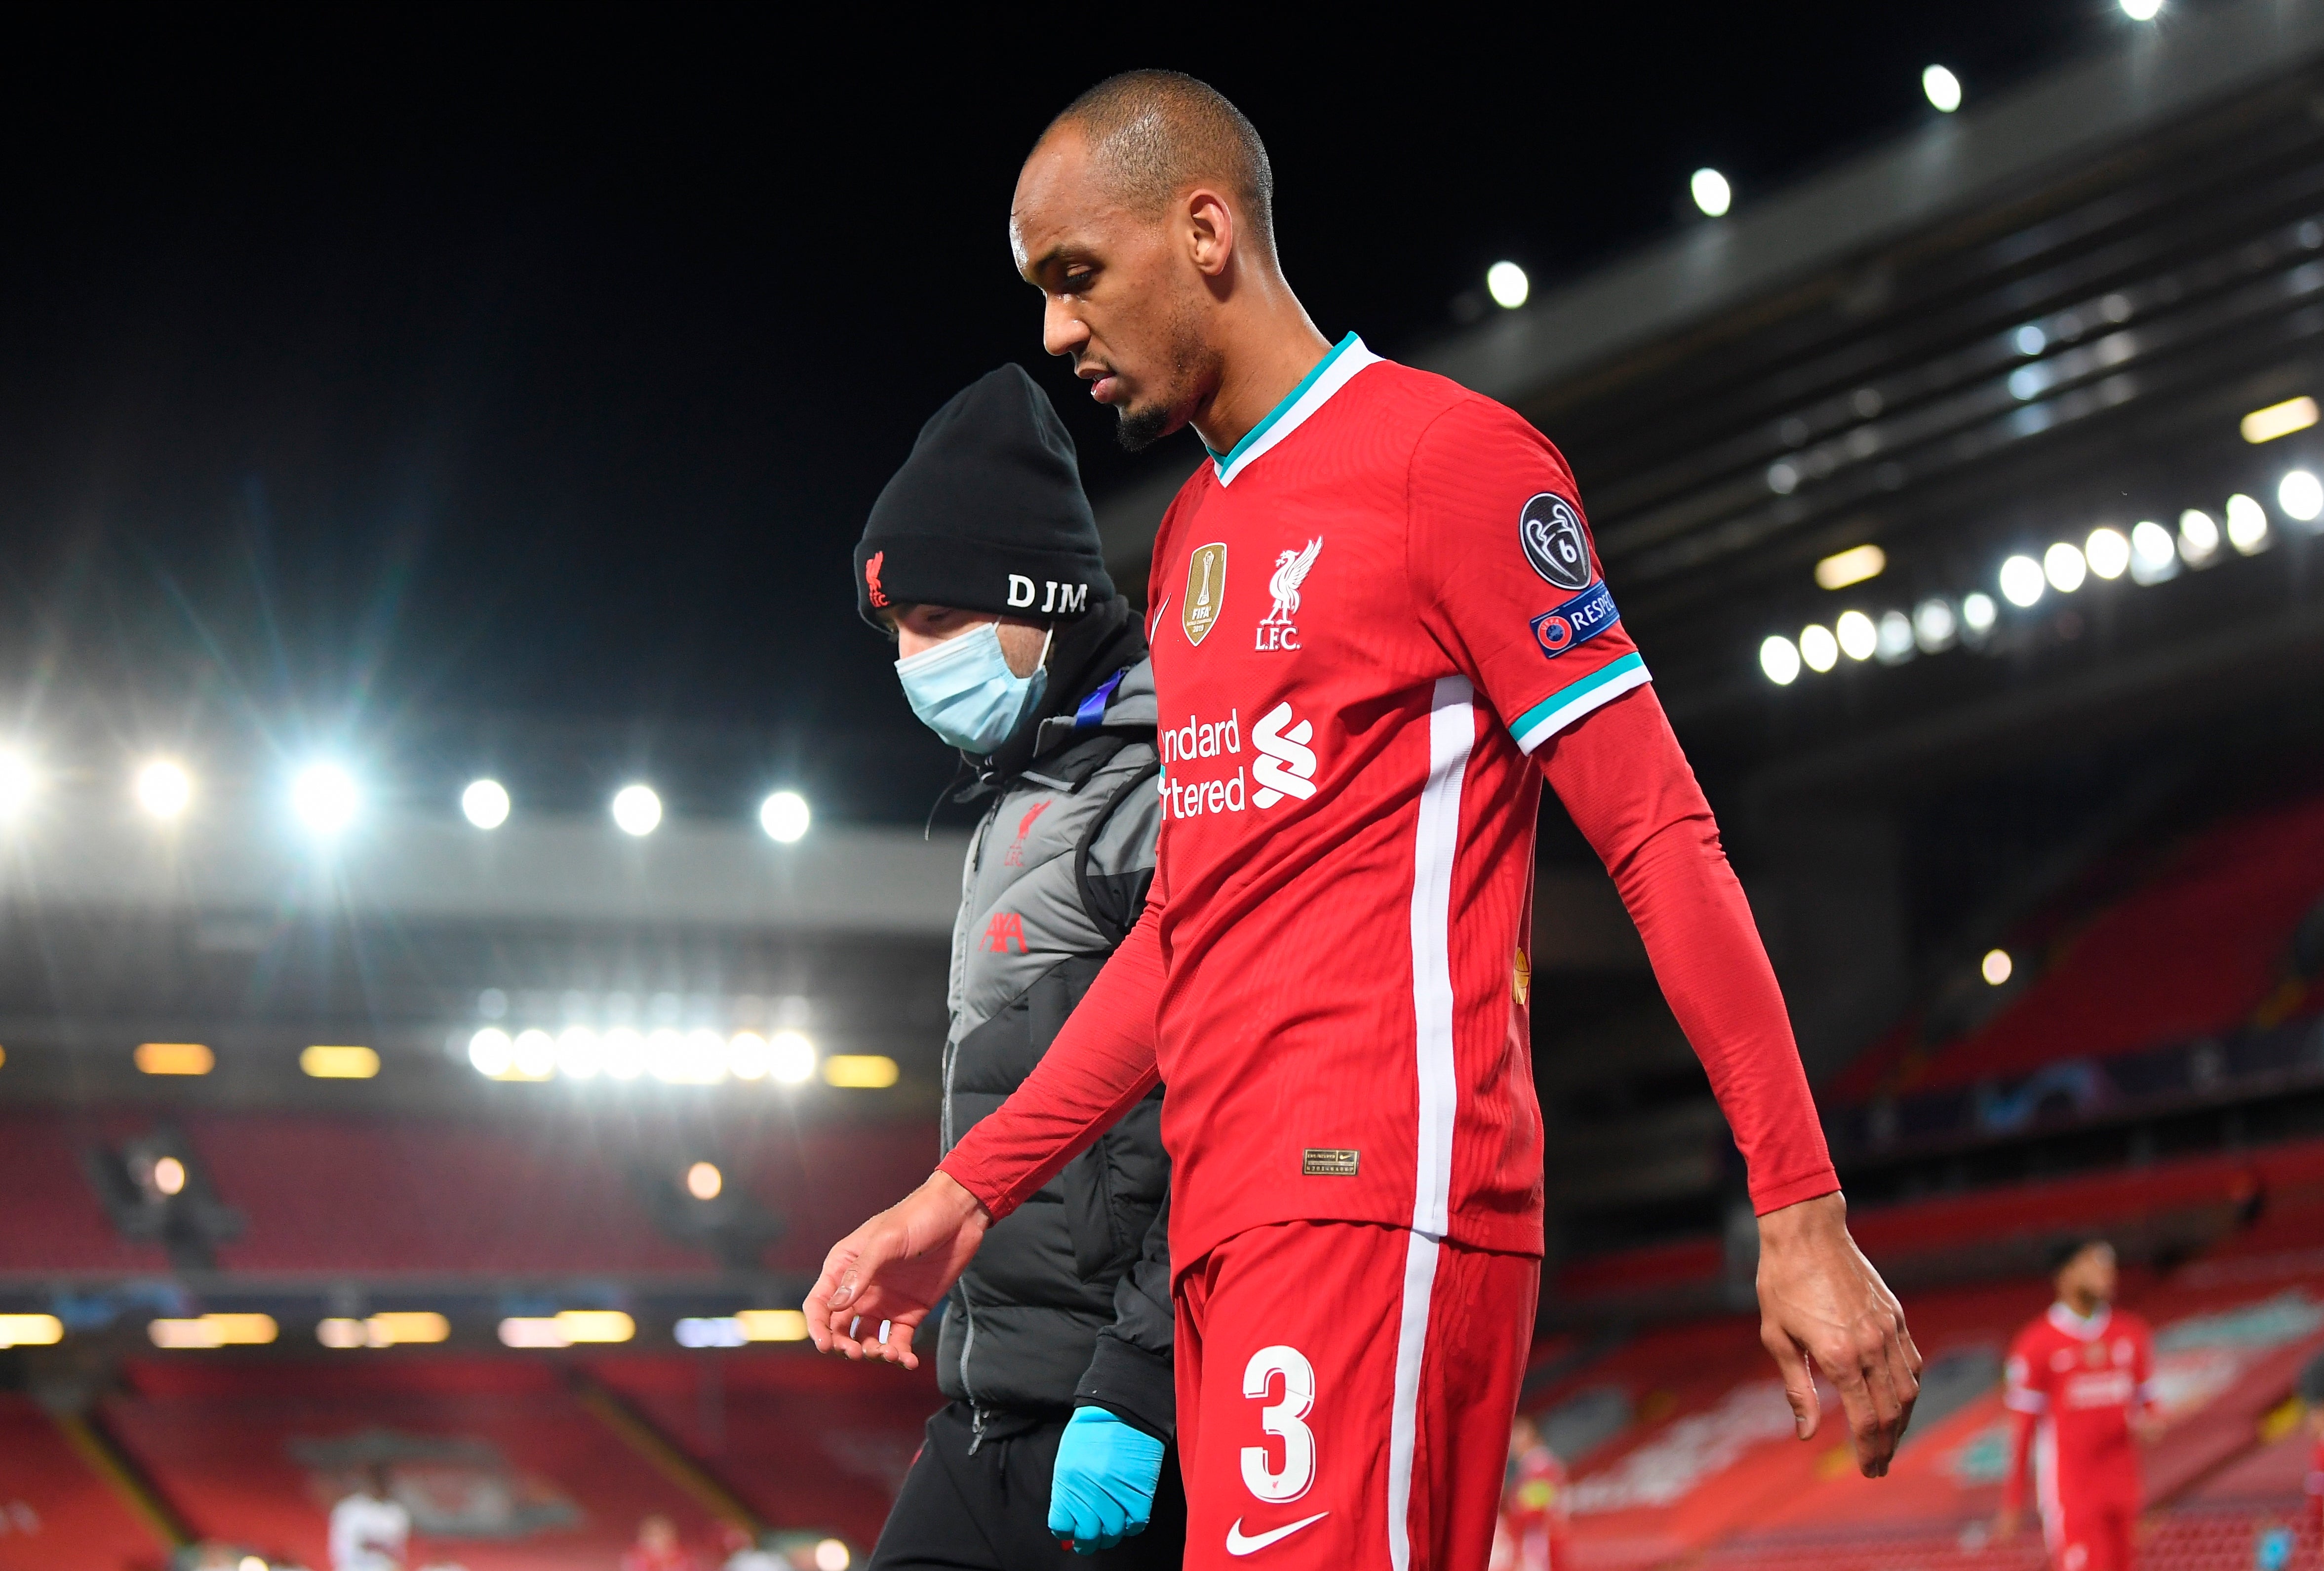 Fabinho suffered a hamstring injury during Liverpool’s 2-0 victory over Midtjylland